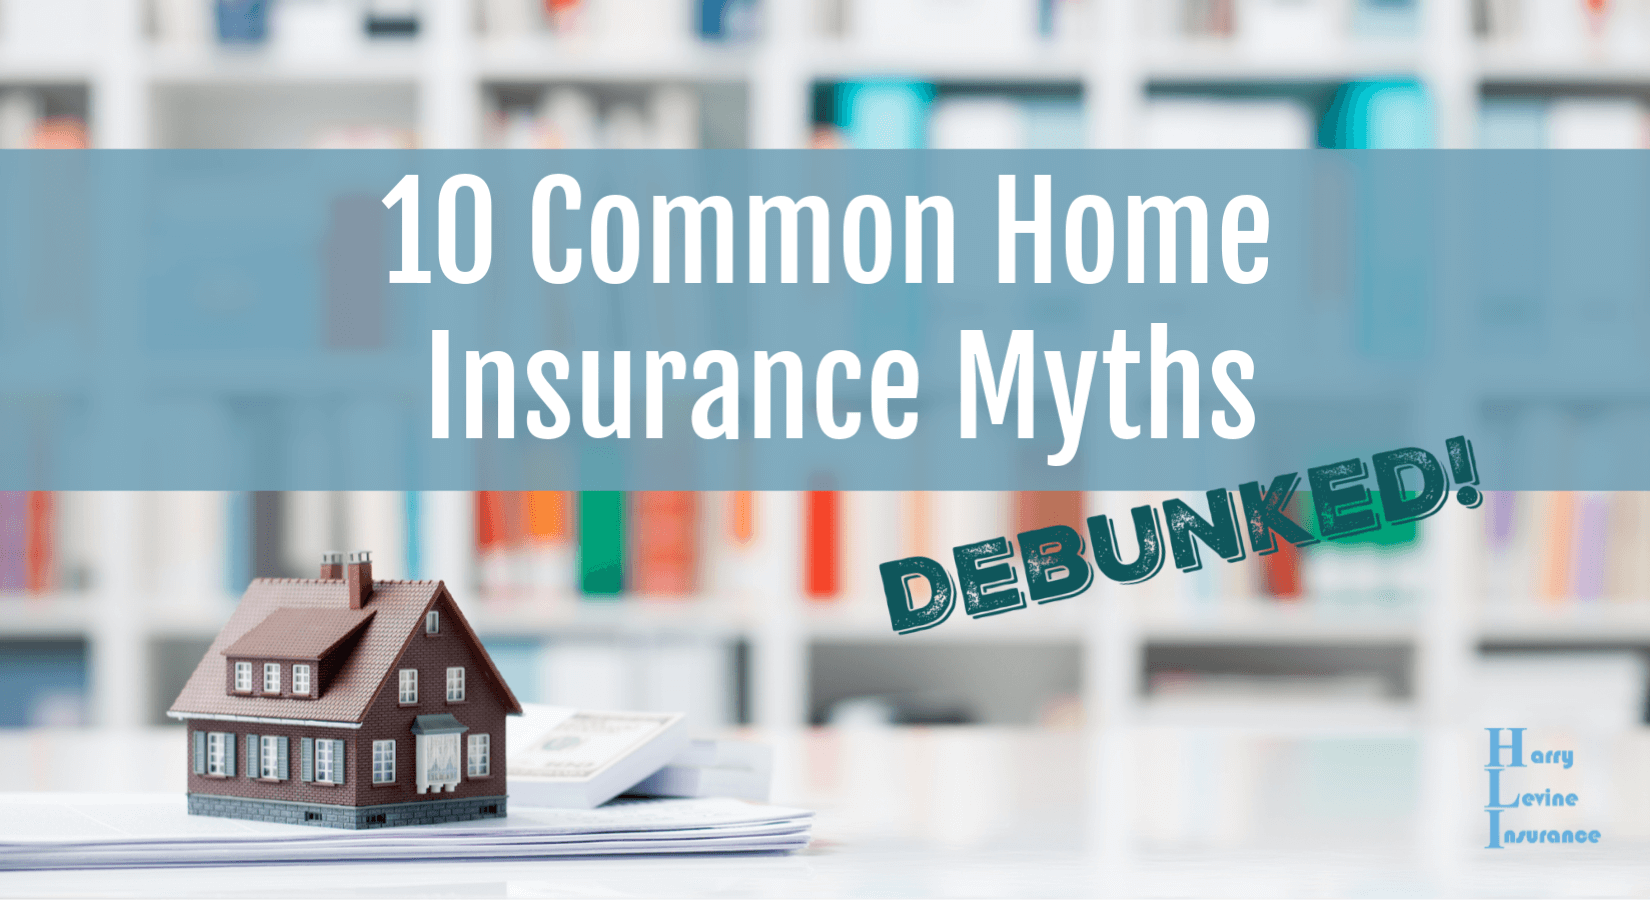 10 Common Home Insurance Myths Debunked! - Harry Levine Insurance